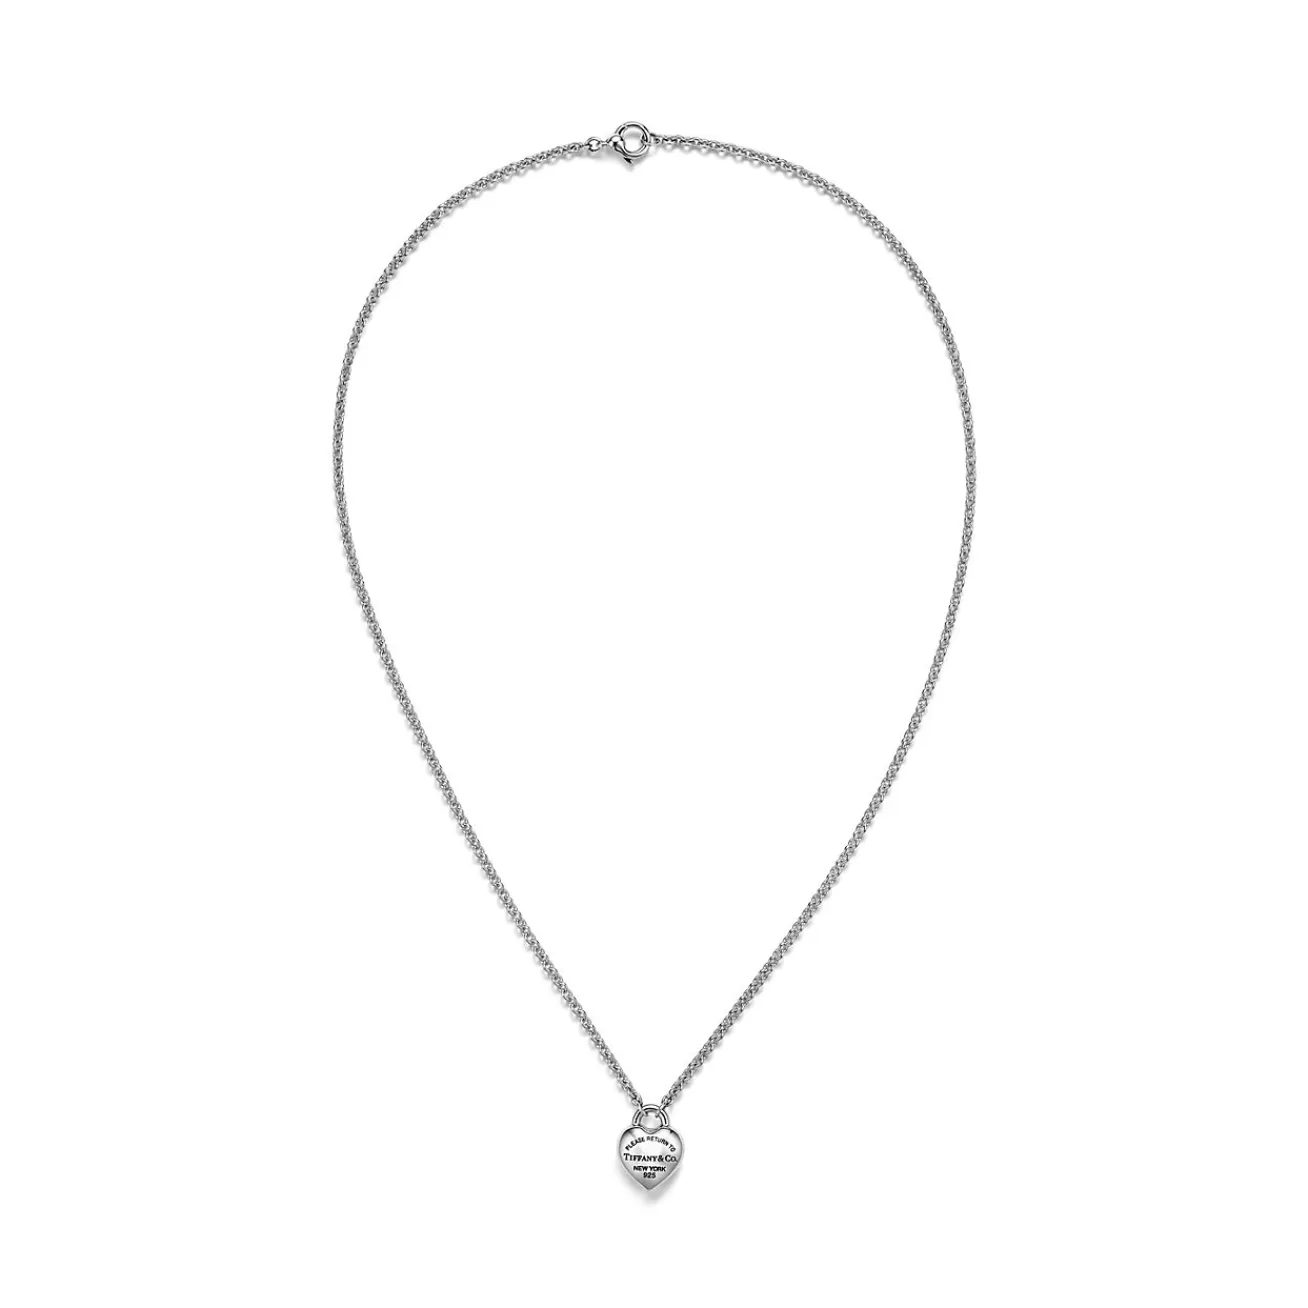 Tiffany & Co. Return to Tiffany® Full Heart Pendant in Sterling Silver | ^ Necklaces & Pendants | Gifts for Her